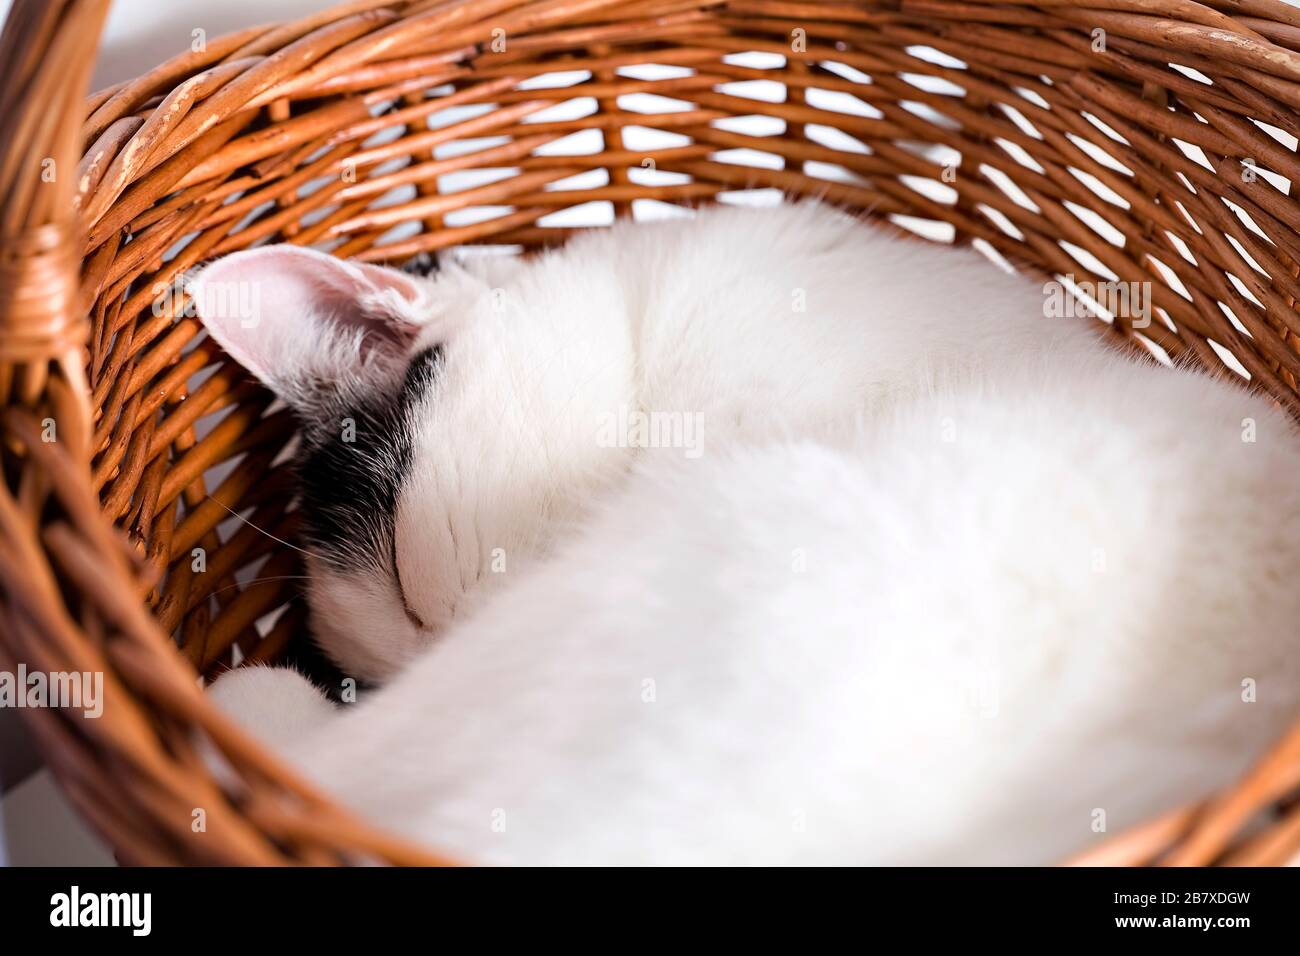 Little black and white cat (Felis catus) fast asleep in a wicker basker Stock Photo